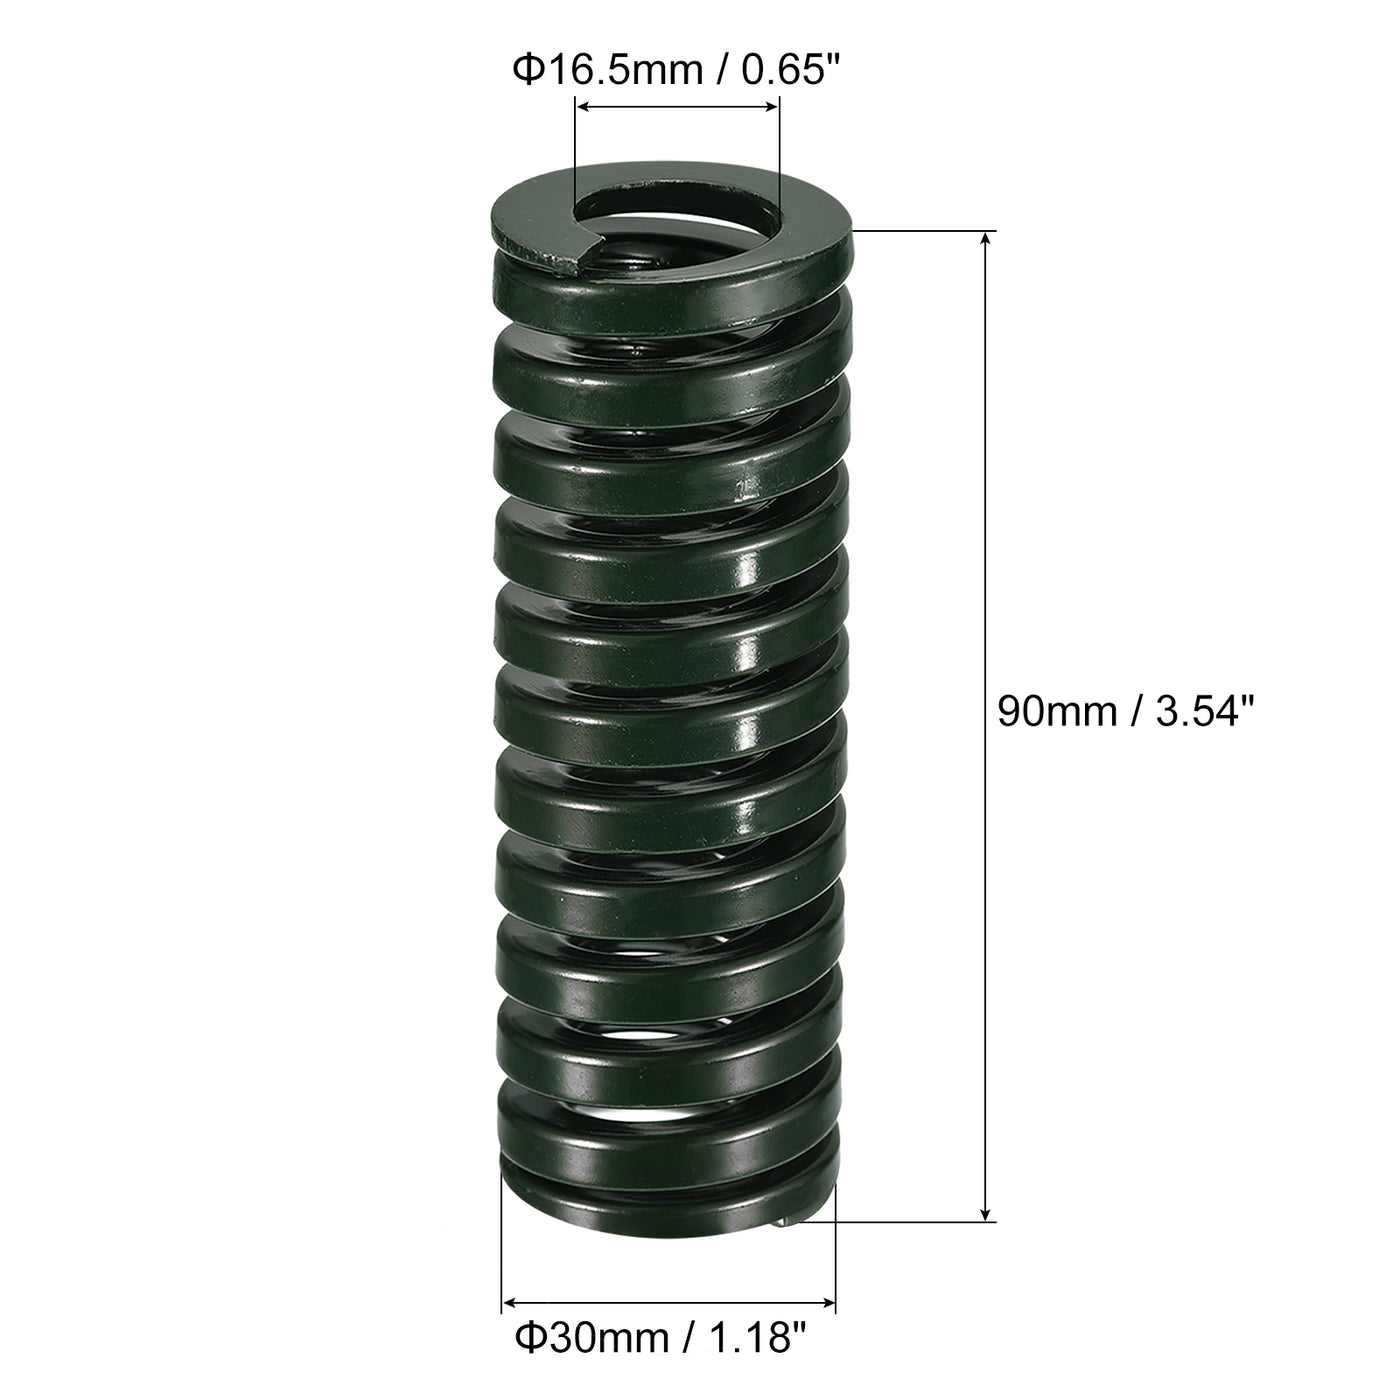 uxcell Uxcell 3D Printer Die Spring, 2pcs 30mm OD 90mm Long Spiral Stamping Compression Green